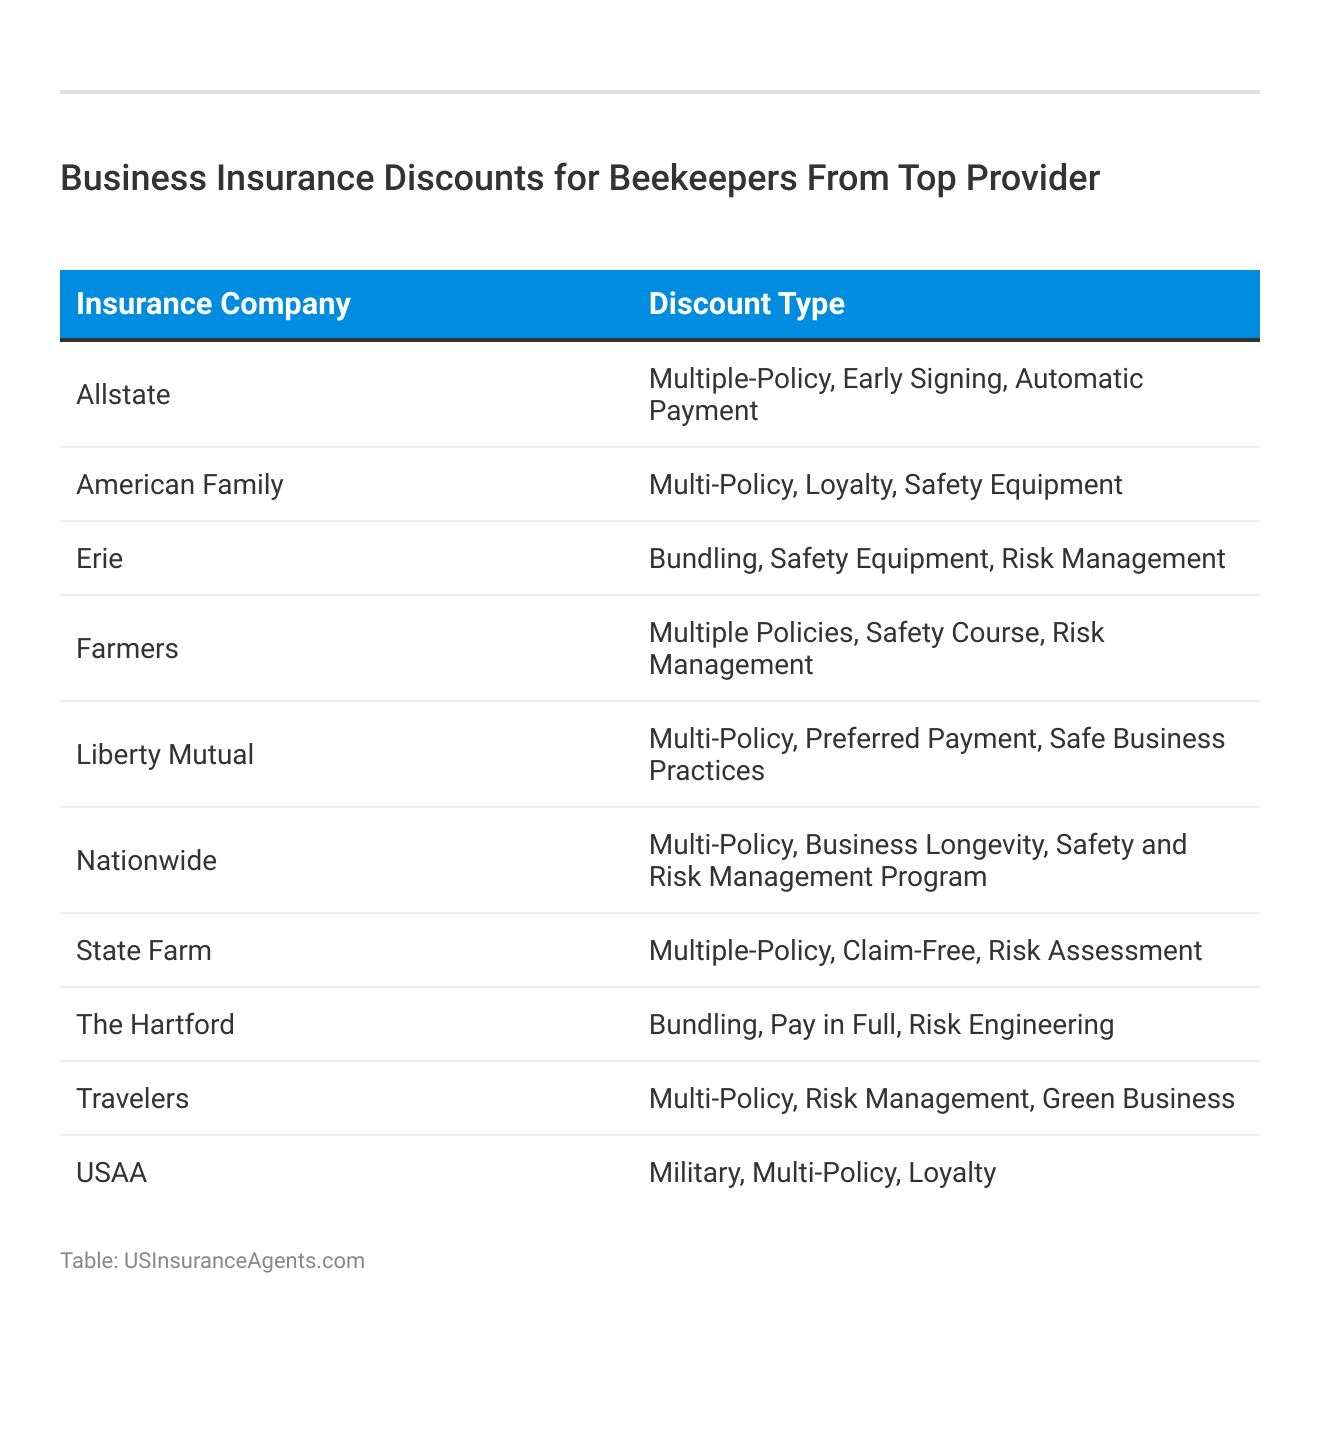 <h3>Business Insurance Discounts for Beekeepers From Top Provider</h3>